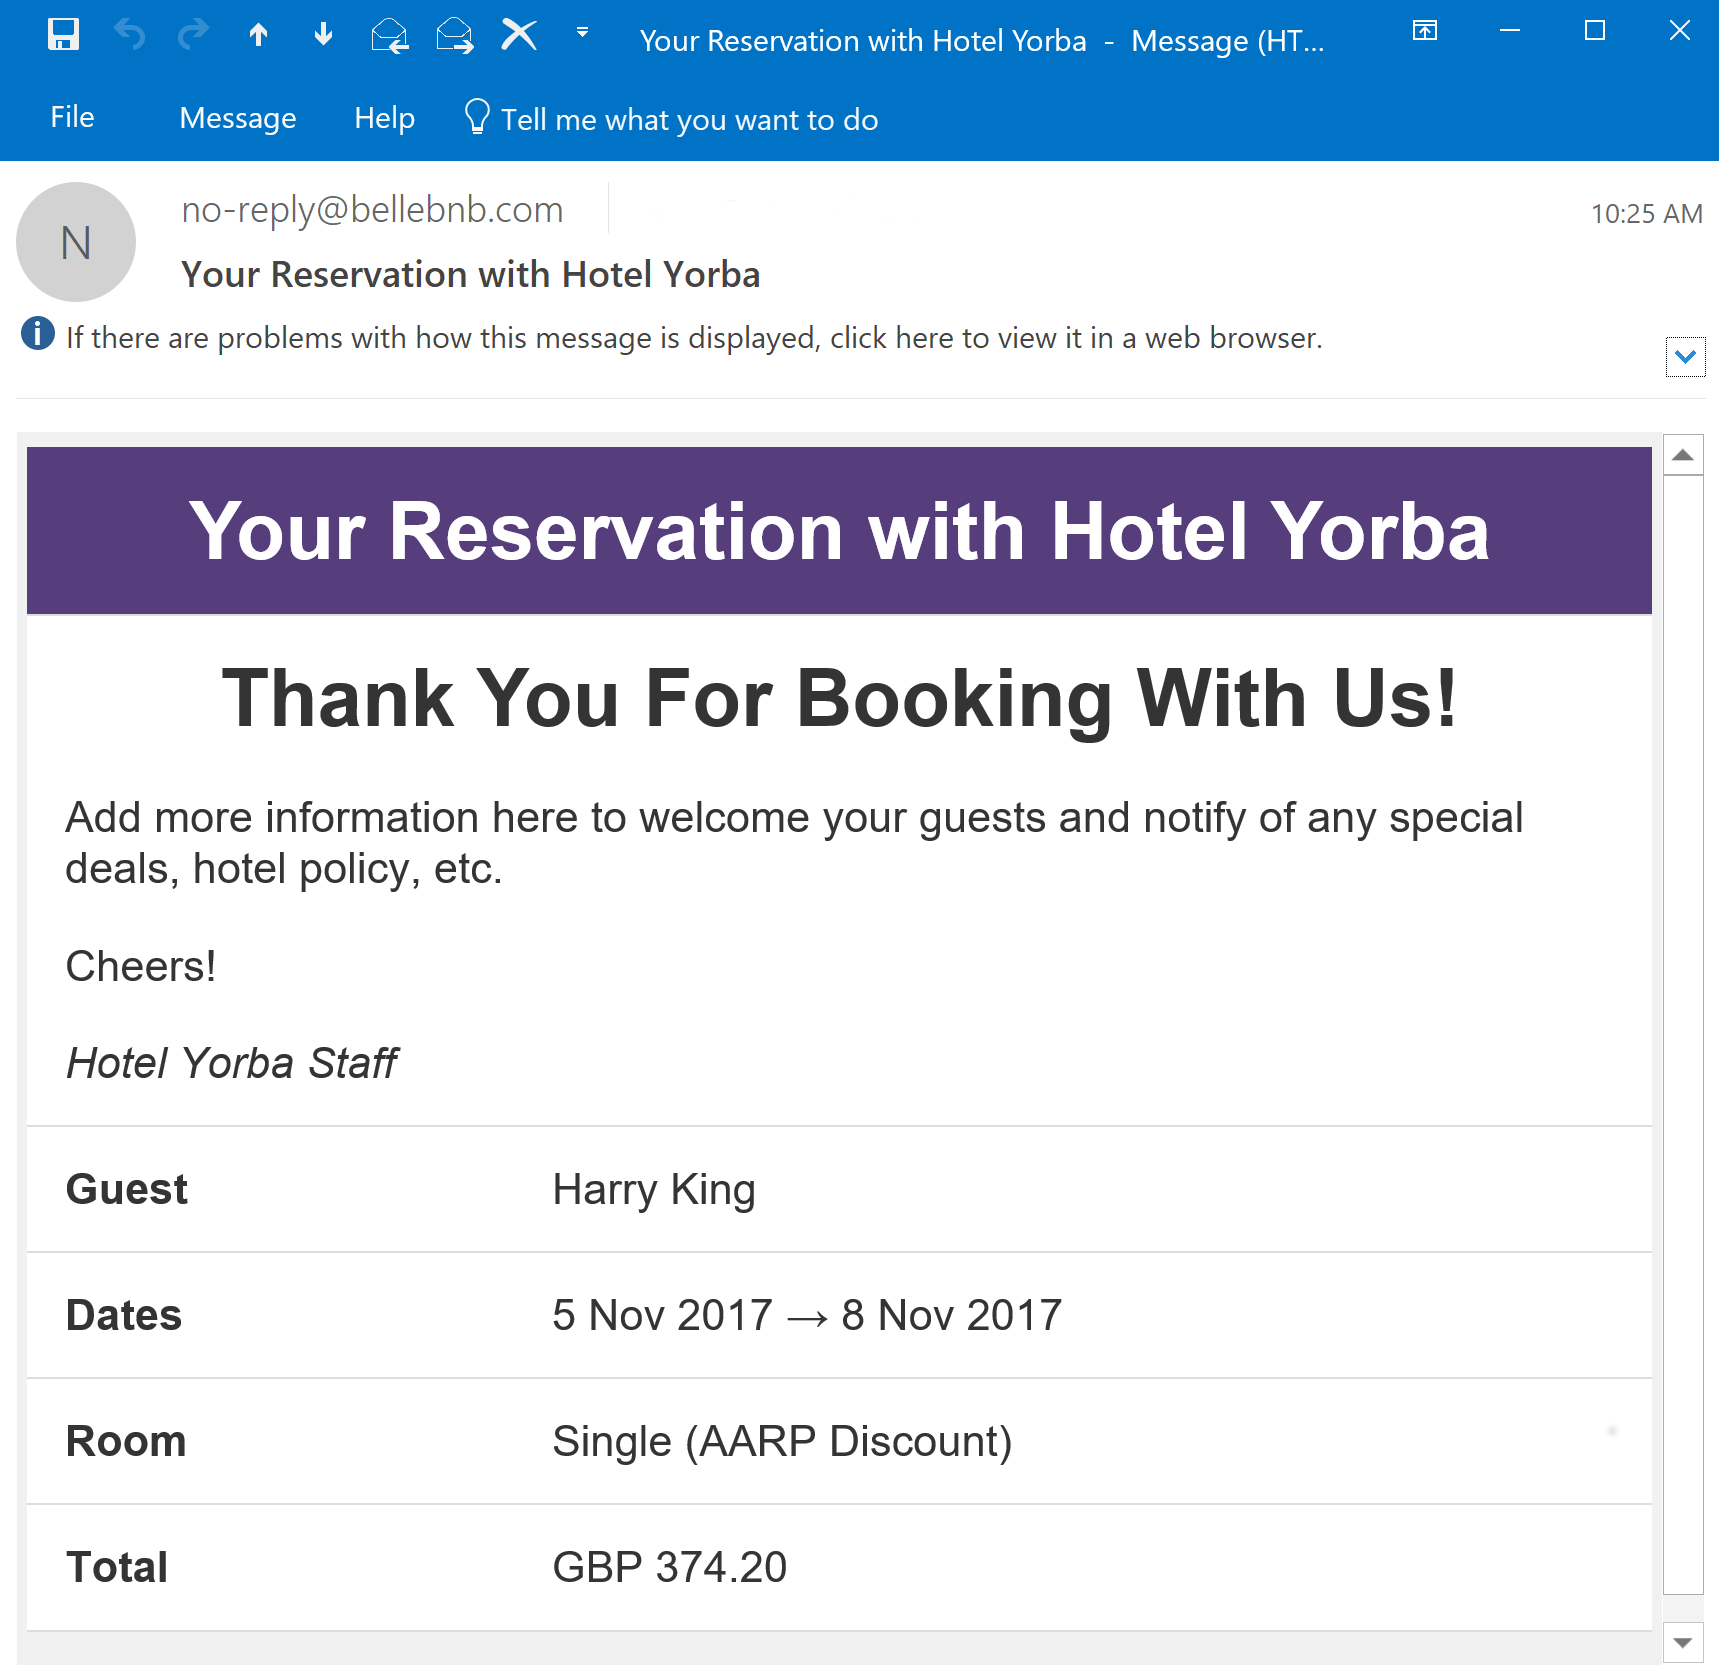 Hotel CRM Customer Relationship Management, Hotel Management HTML Emails You can now create custom emails for your daily hotel activities. You can create a custom message for new reservations, check-outs, and cancellations. Edit your messages in HTML to send out automatically as part of your bookings flow.